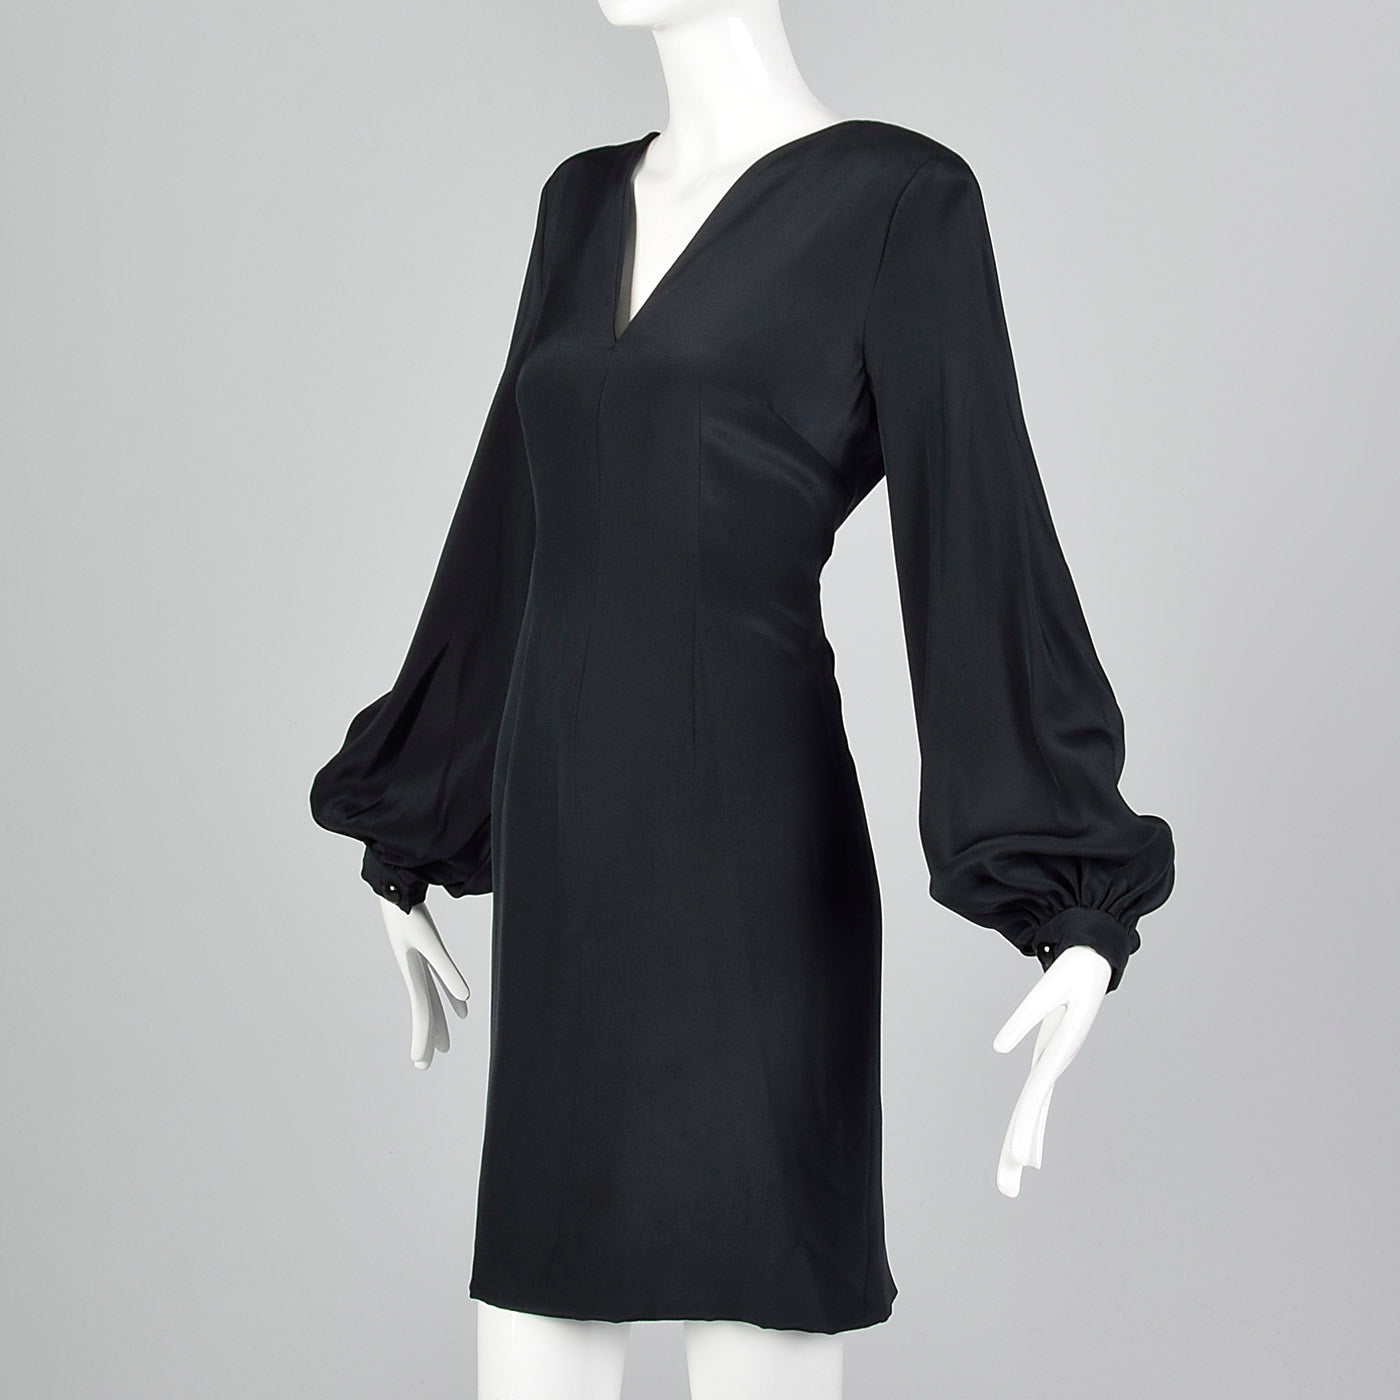 1980s Pauline Trigere Shift Dress with Bishop Sleeve